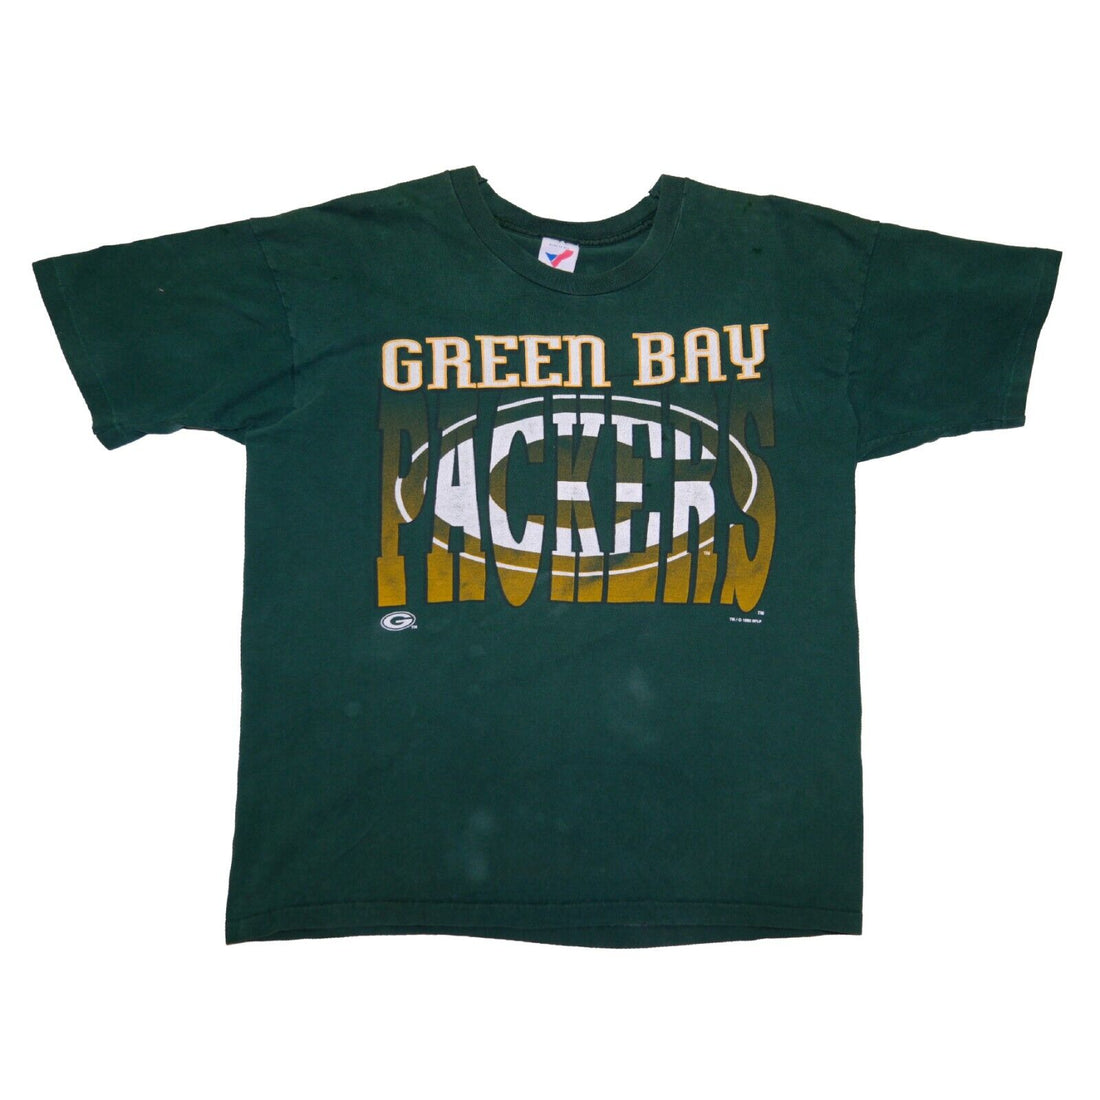 Vintage Green Bay Packers T-Shirt Size XL 1993 90s NFL